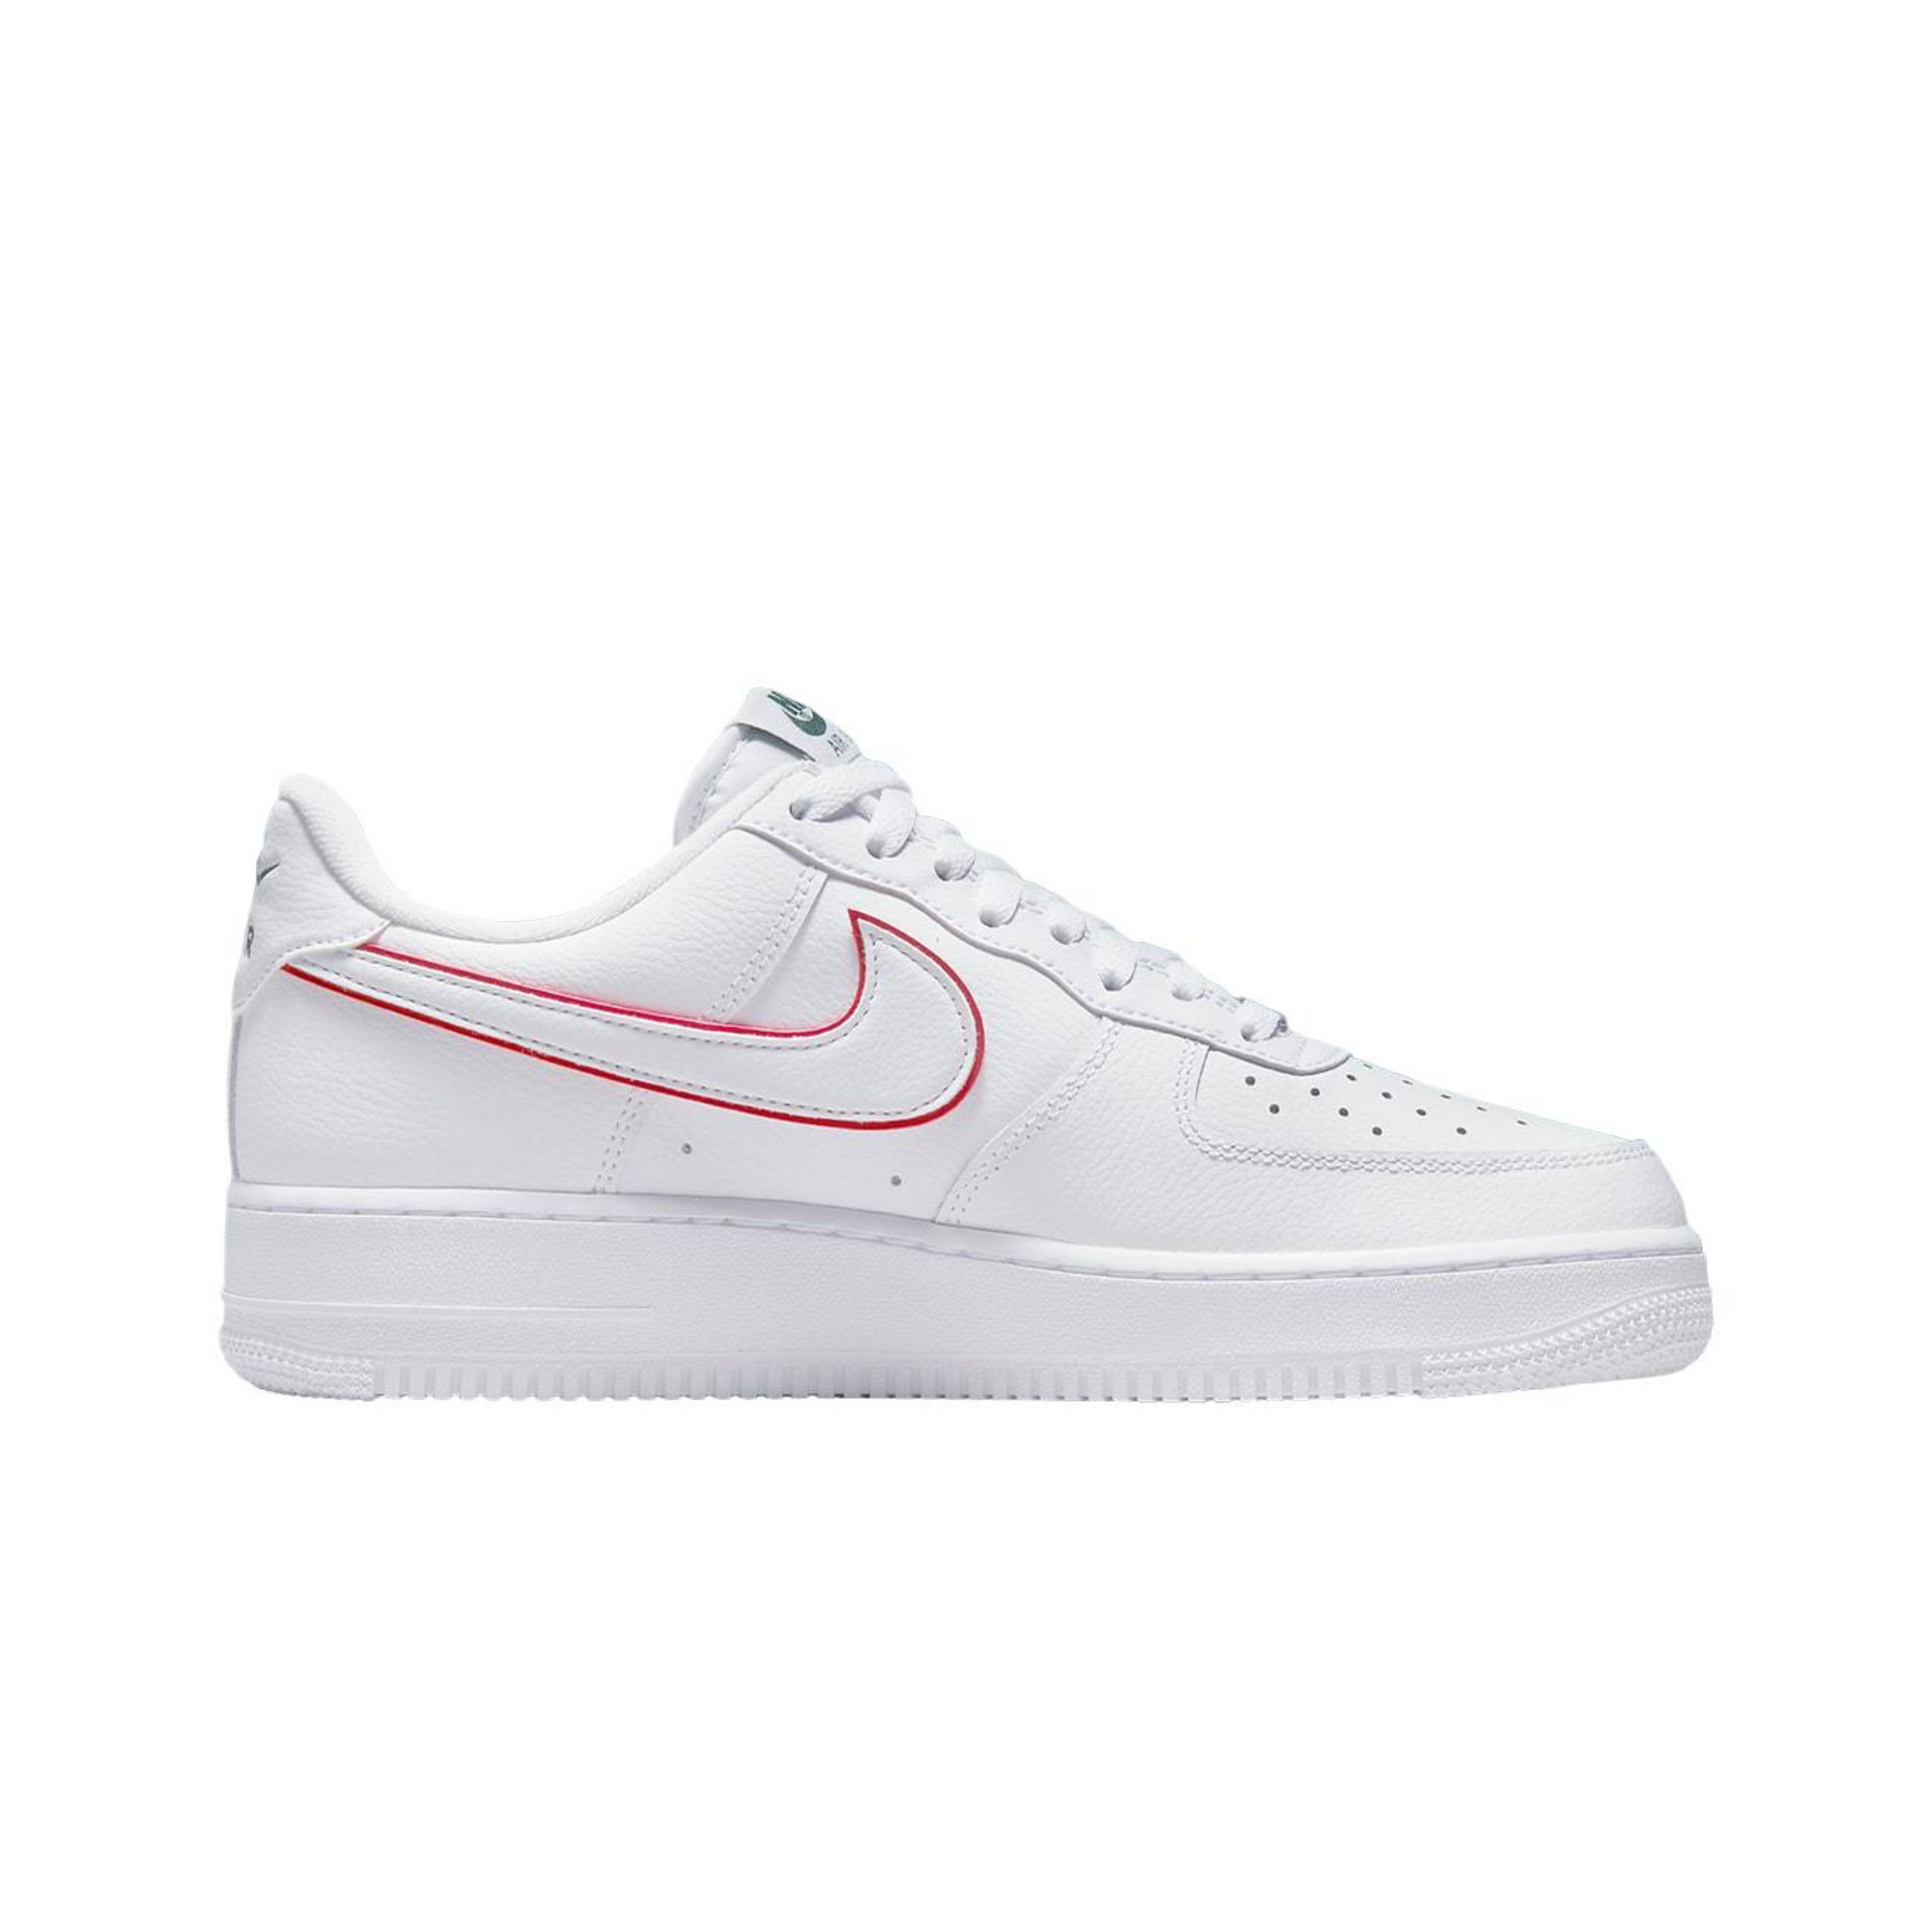 Кросівки Nike Air Force 1 Low Just Do It "White Noble Green Metallic Silver University Red"